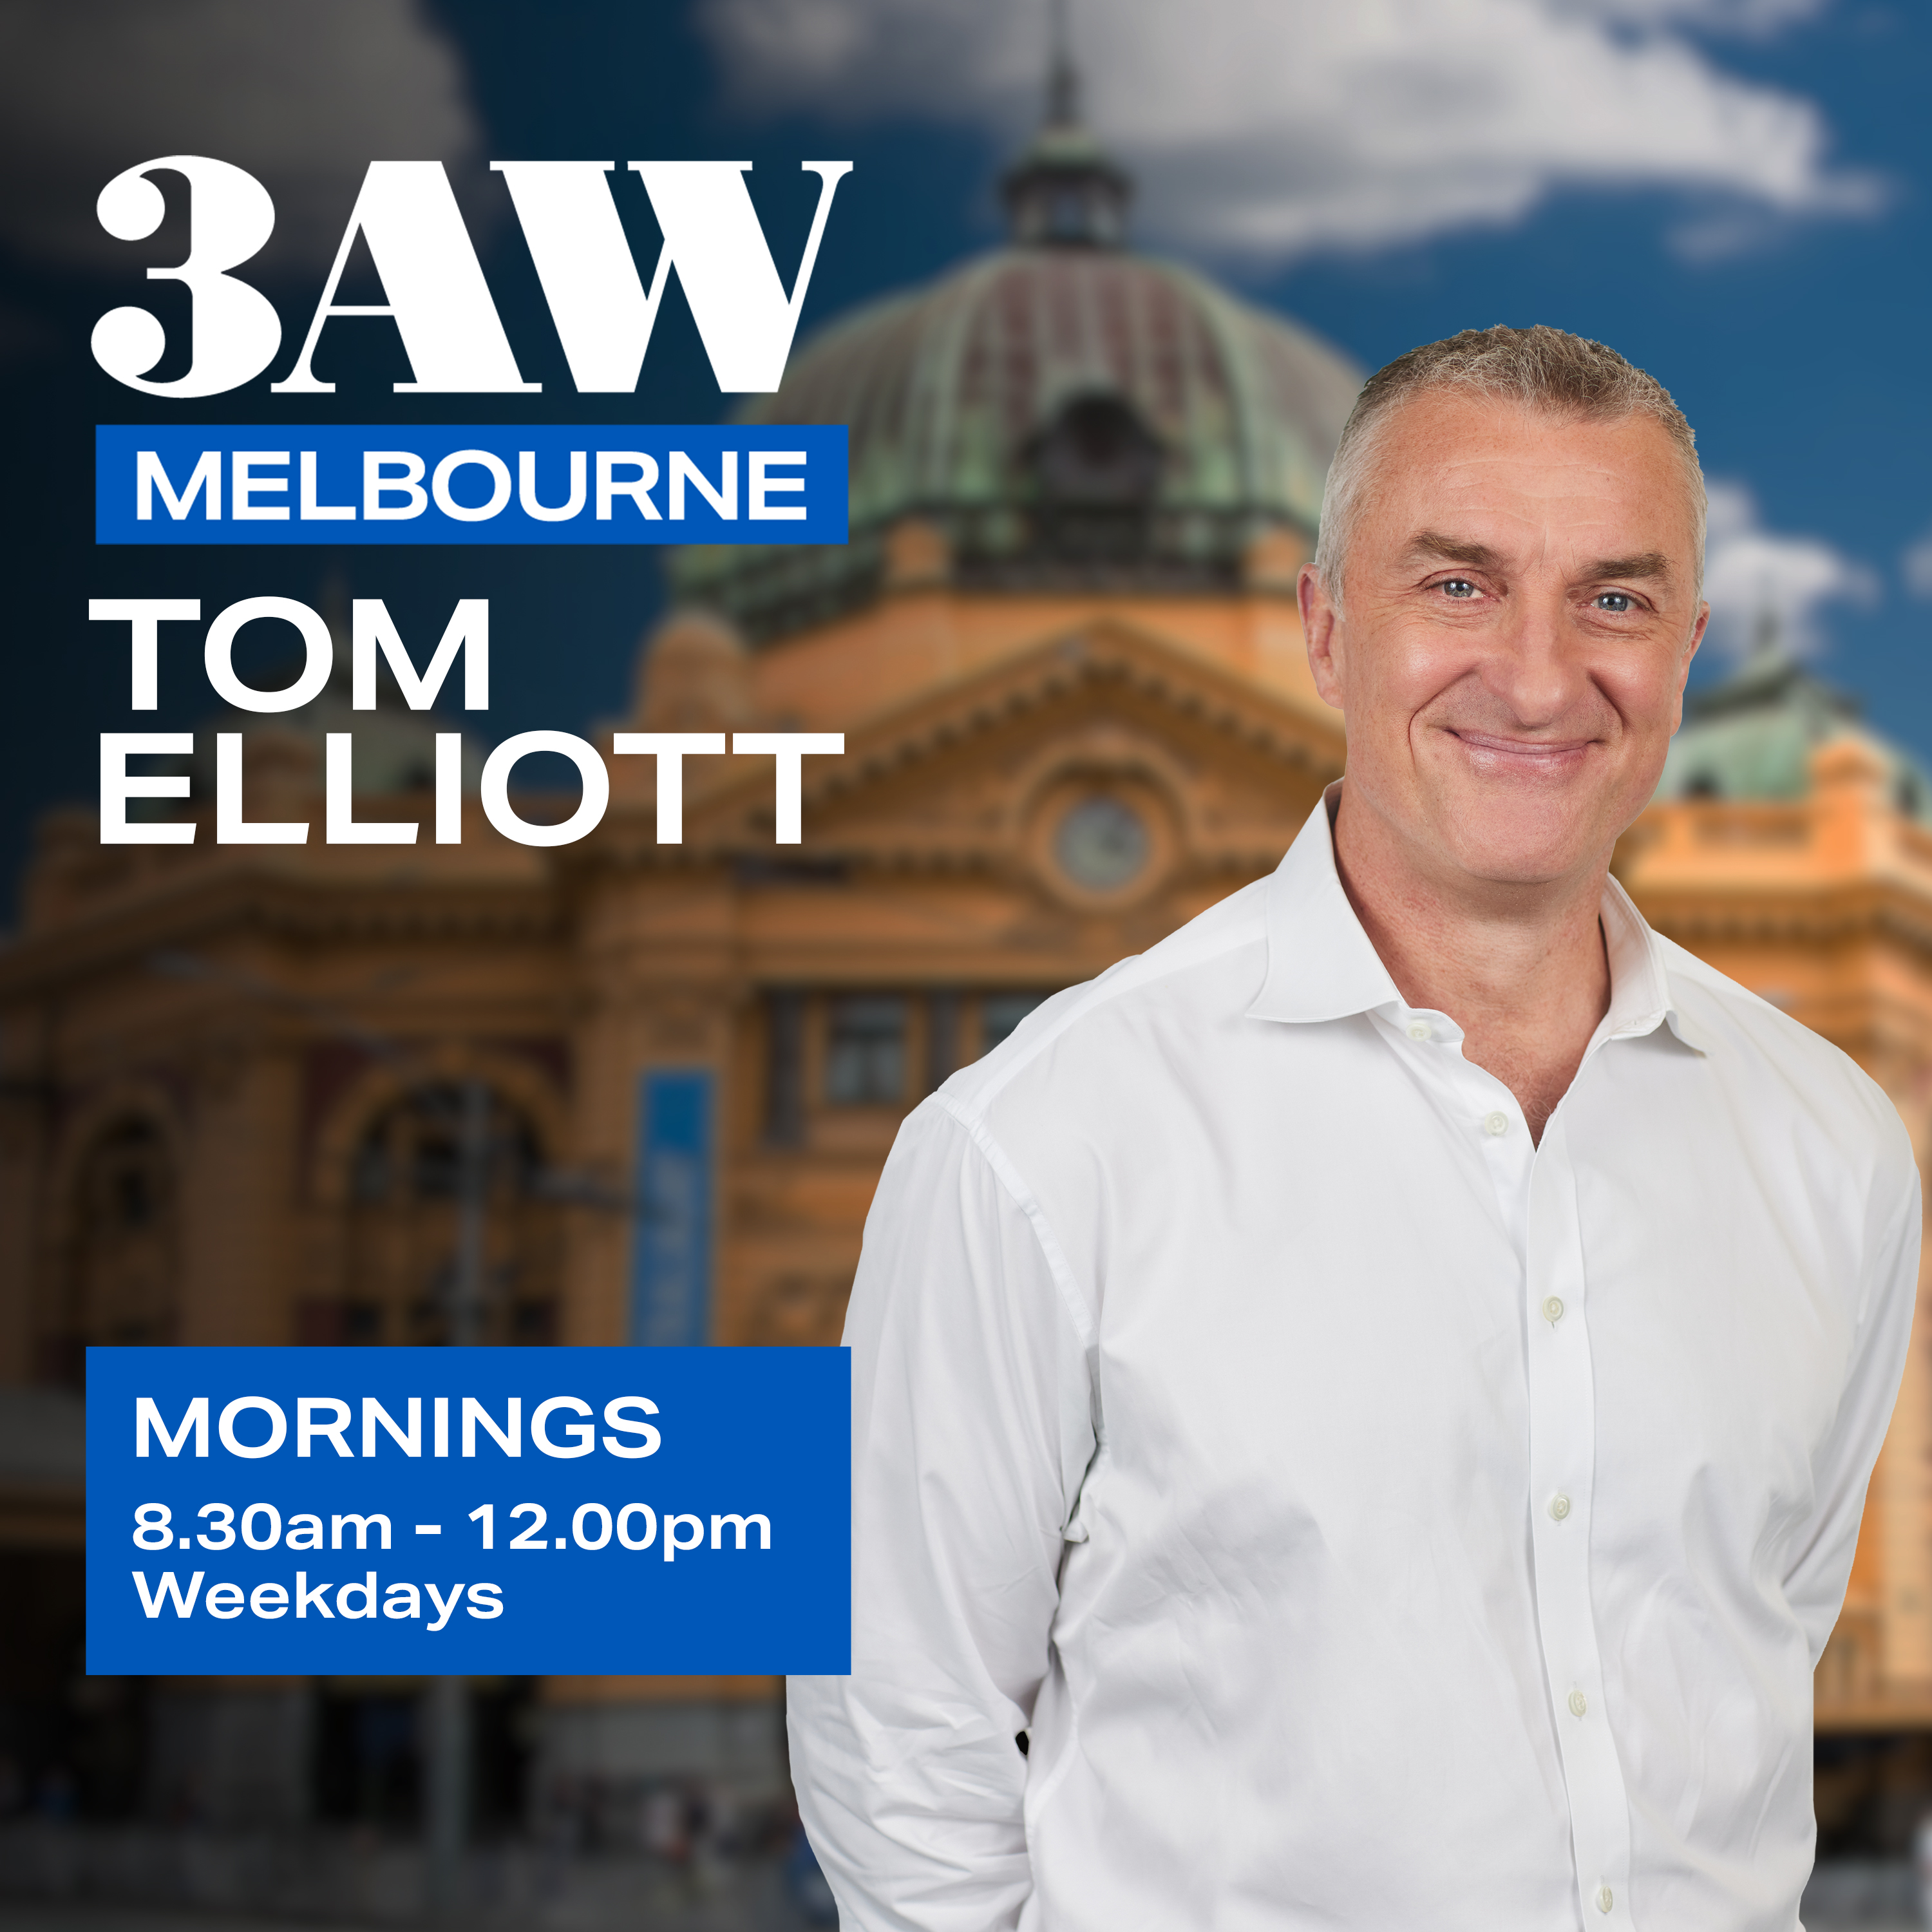 'She was drunk': Why Tom Elliott wants politicians to be breath tested at work